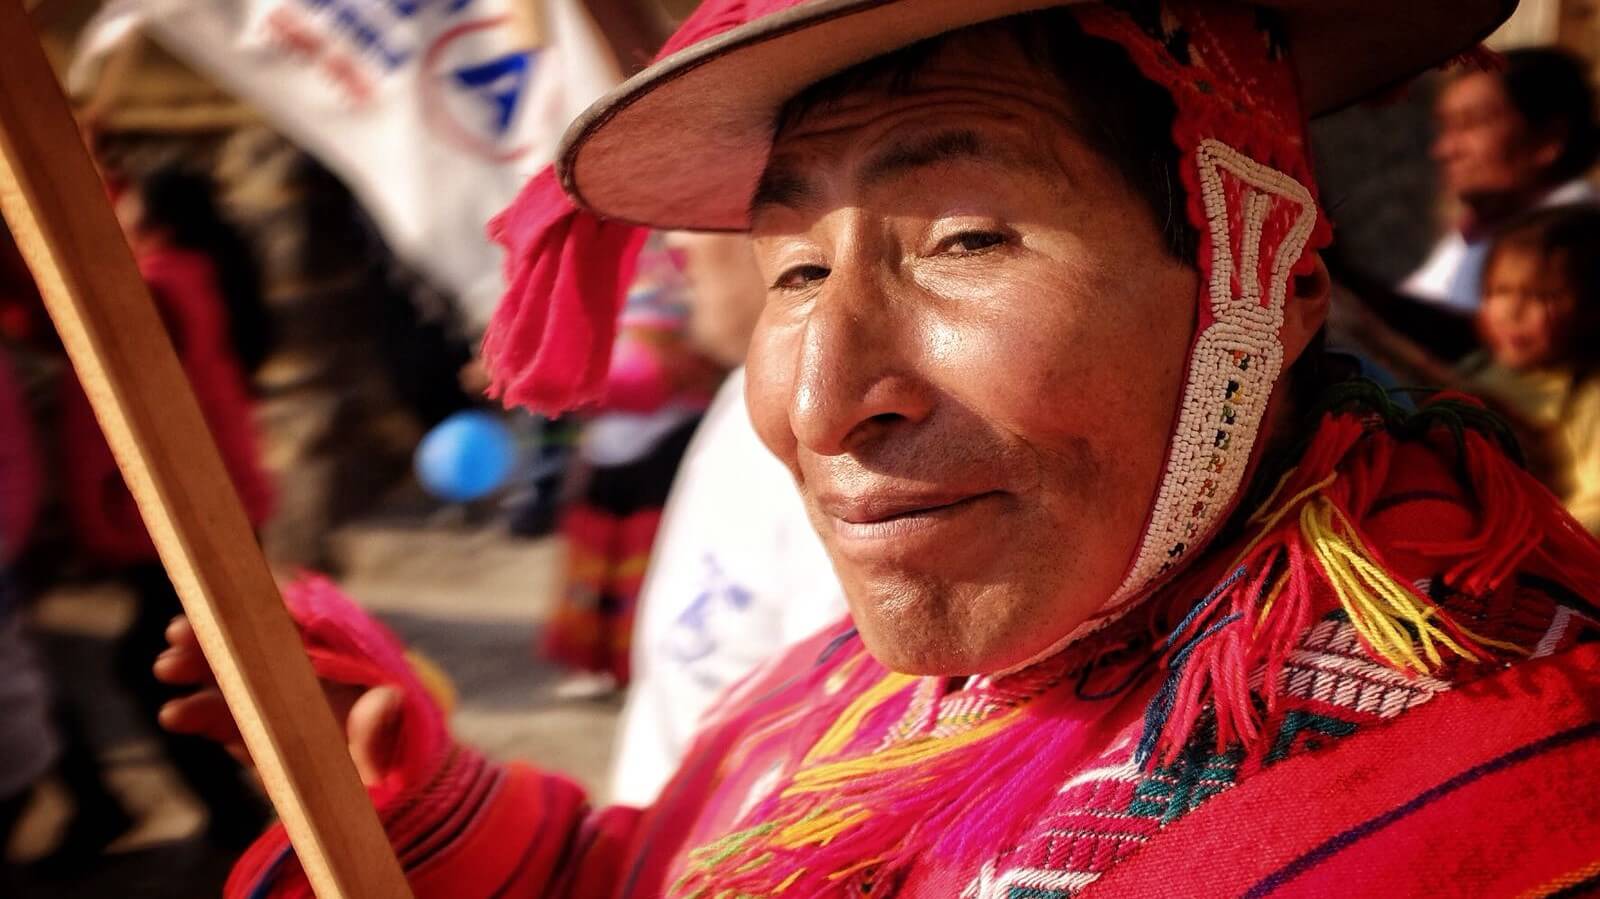 Peruvian man wearing colorful typical clothes in the authentic Andean village of Huacahuasi, lares, Peru | RESPONSible Travel Peru